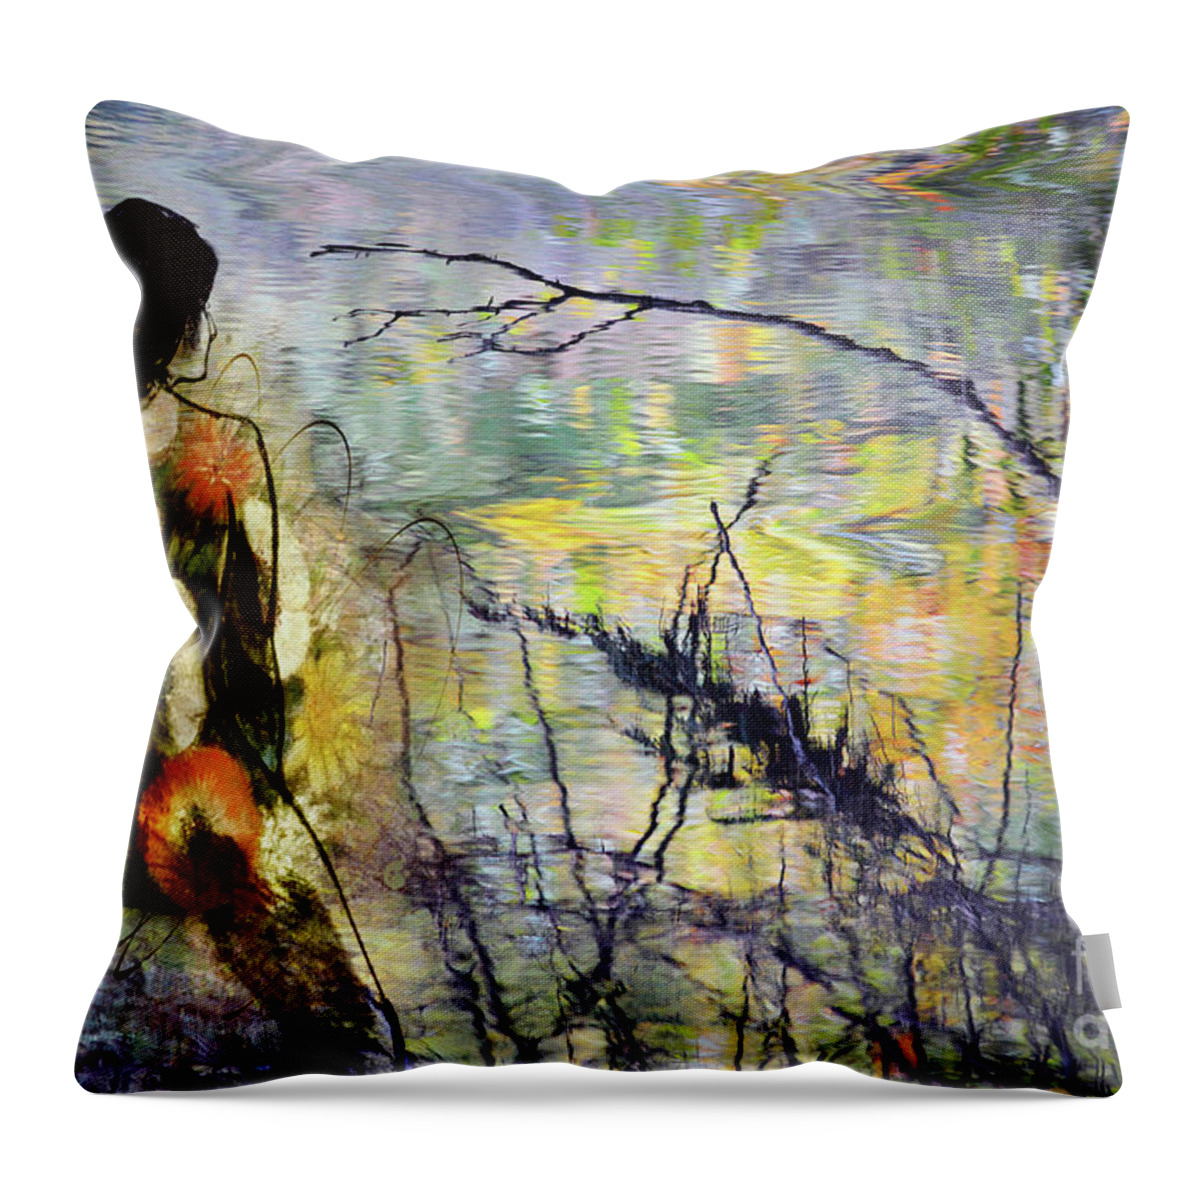 Mirroring Throw Pillow featuring the photograph Reflections by Arthur Miller